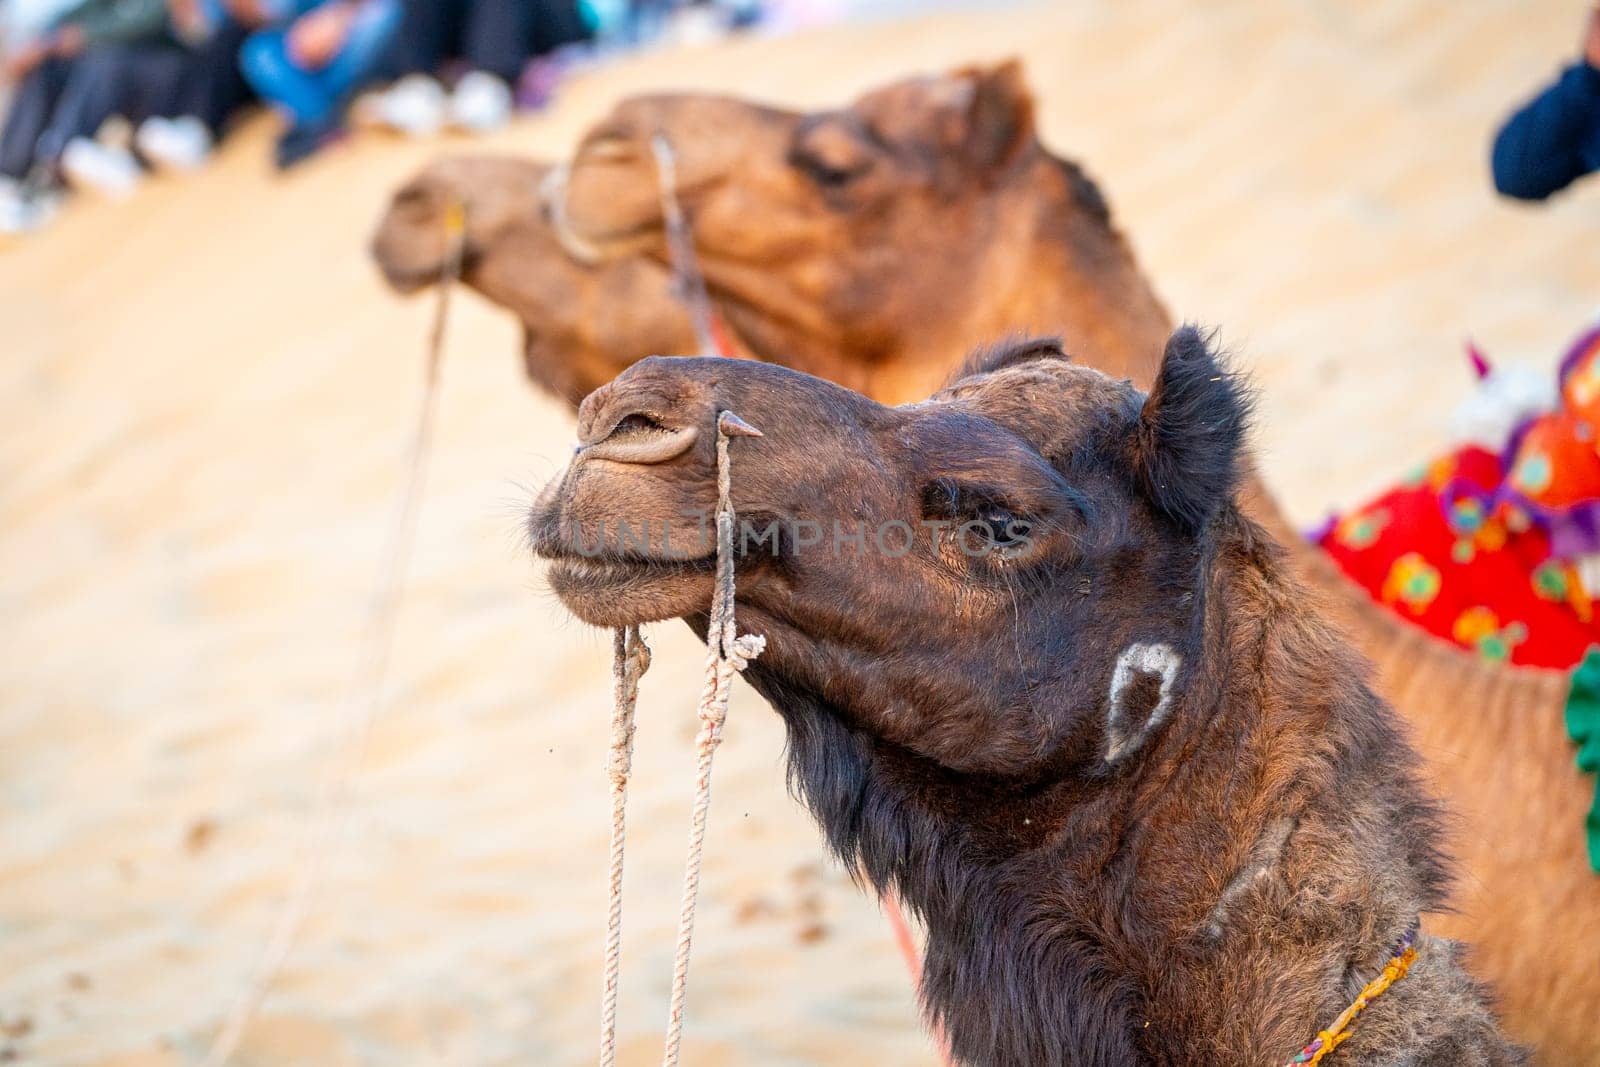 close up shot of Indian camel baying while sitting on sand with tourists in distance showing a popular attraction of people riding these animals in Sam Thar desert in Jaisalmer Rajasthan by Shalinimathur